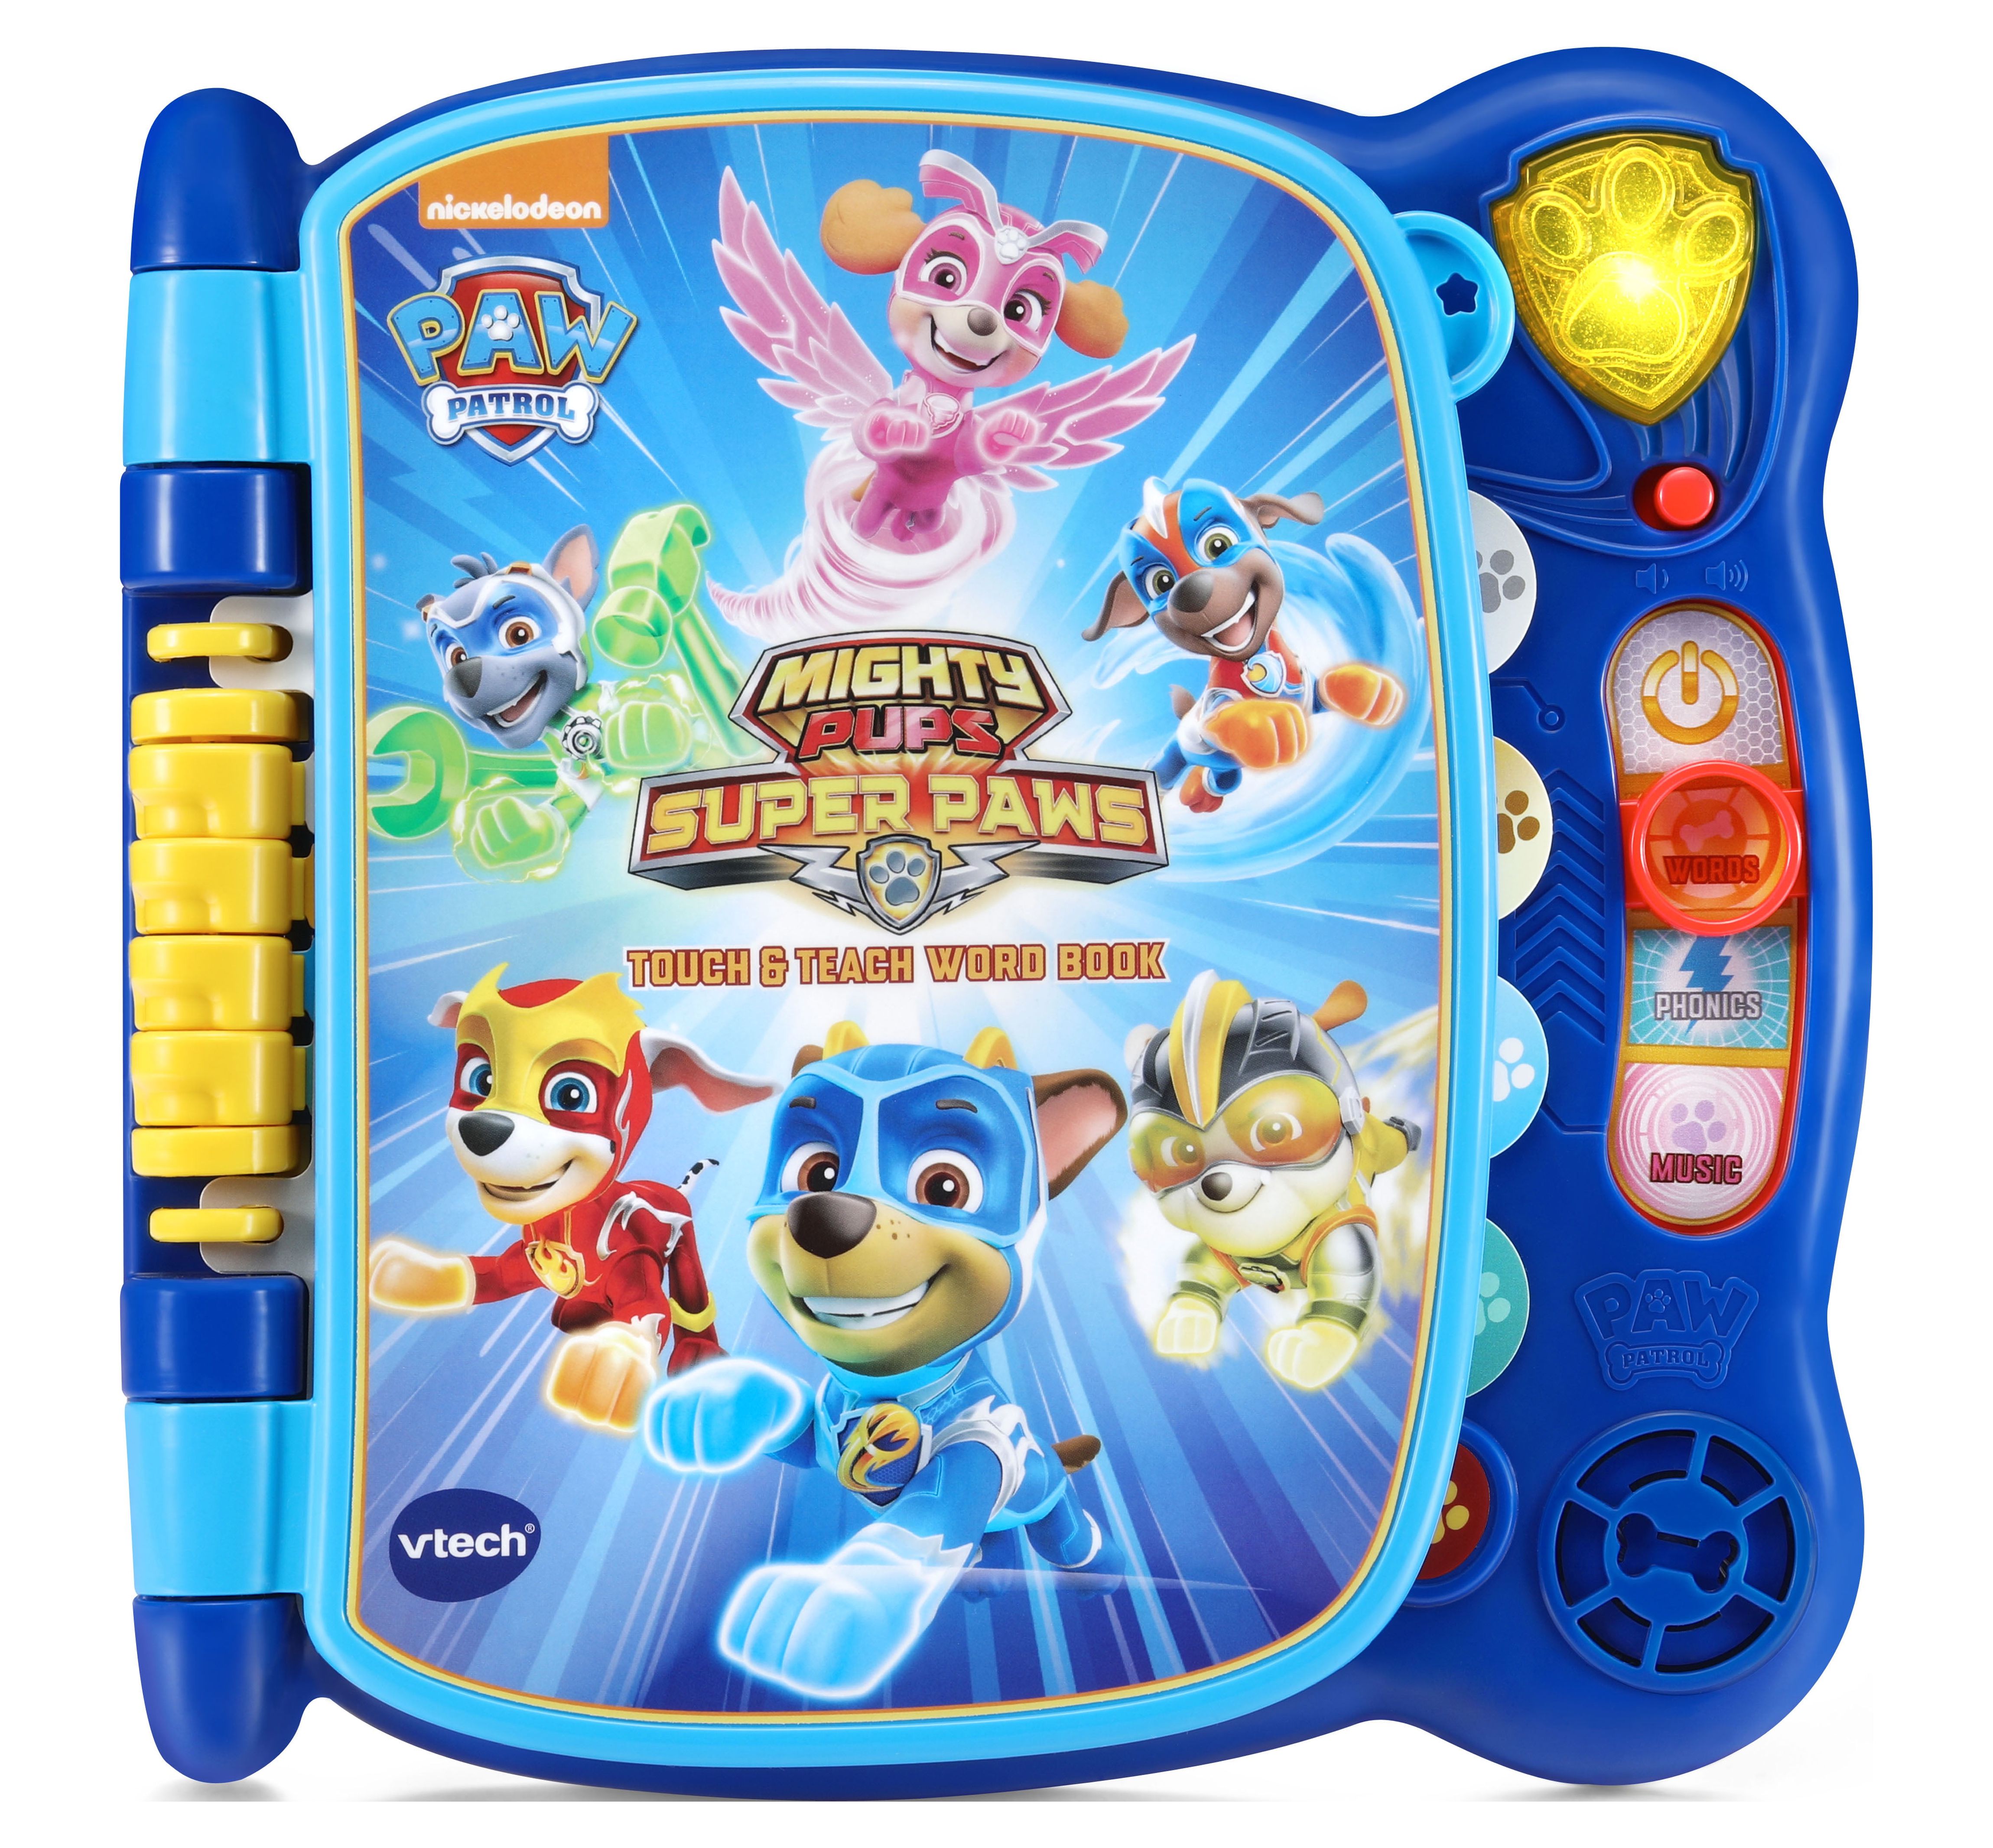 VTech® PAW Patrol Mighty Pups Touch & Teach Word Book With Ryder - image 1 of 14